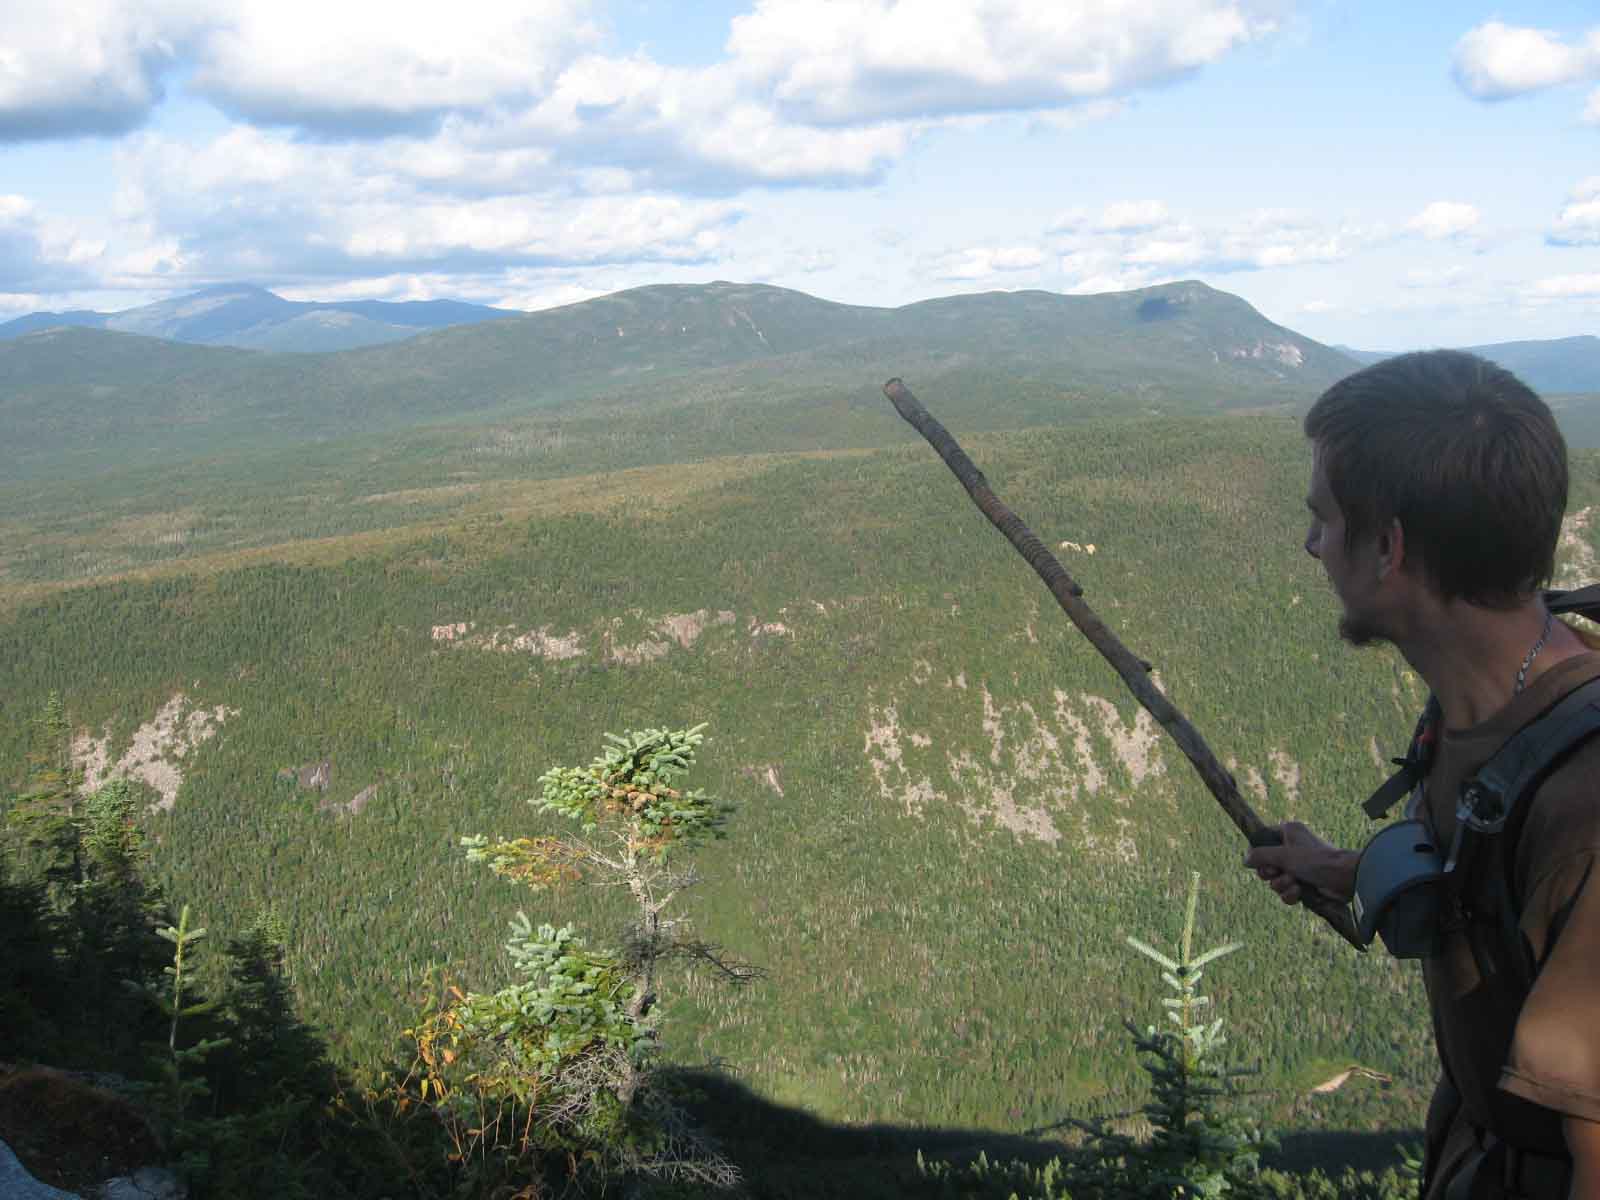 Turok pointing out Mount Washington in the distance with his hiking stick.